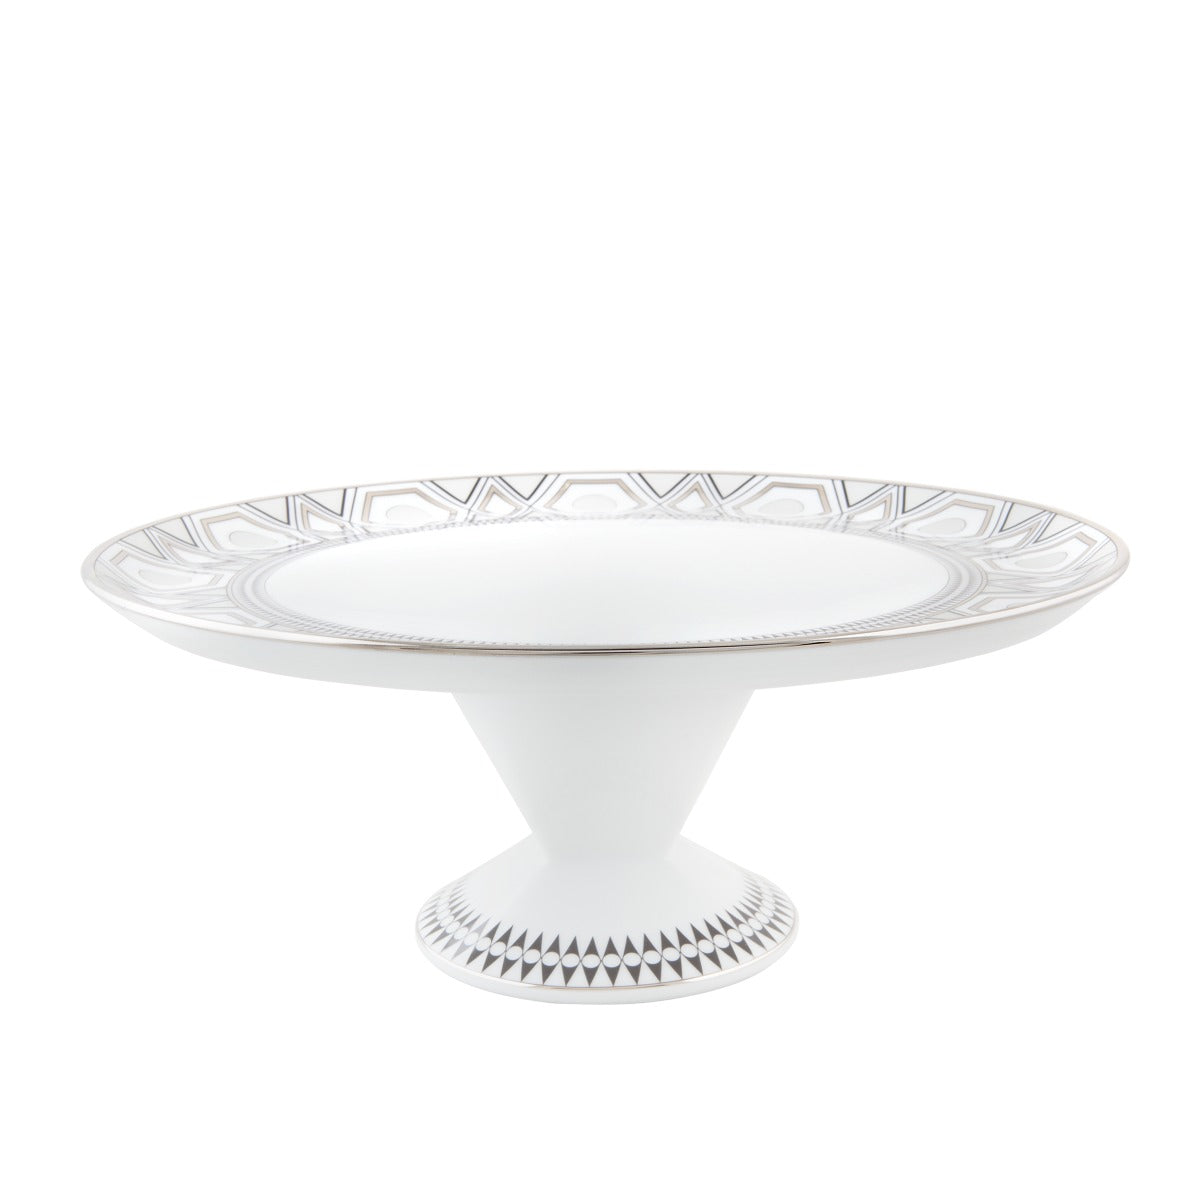 Footed cake stand